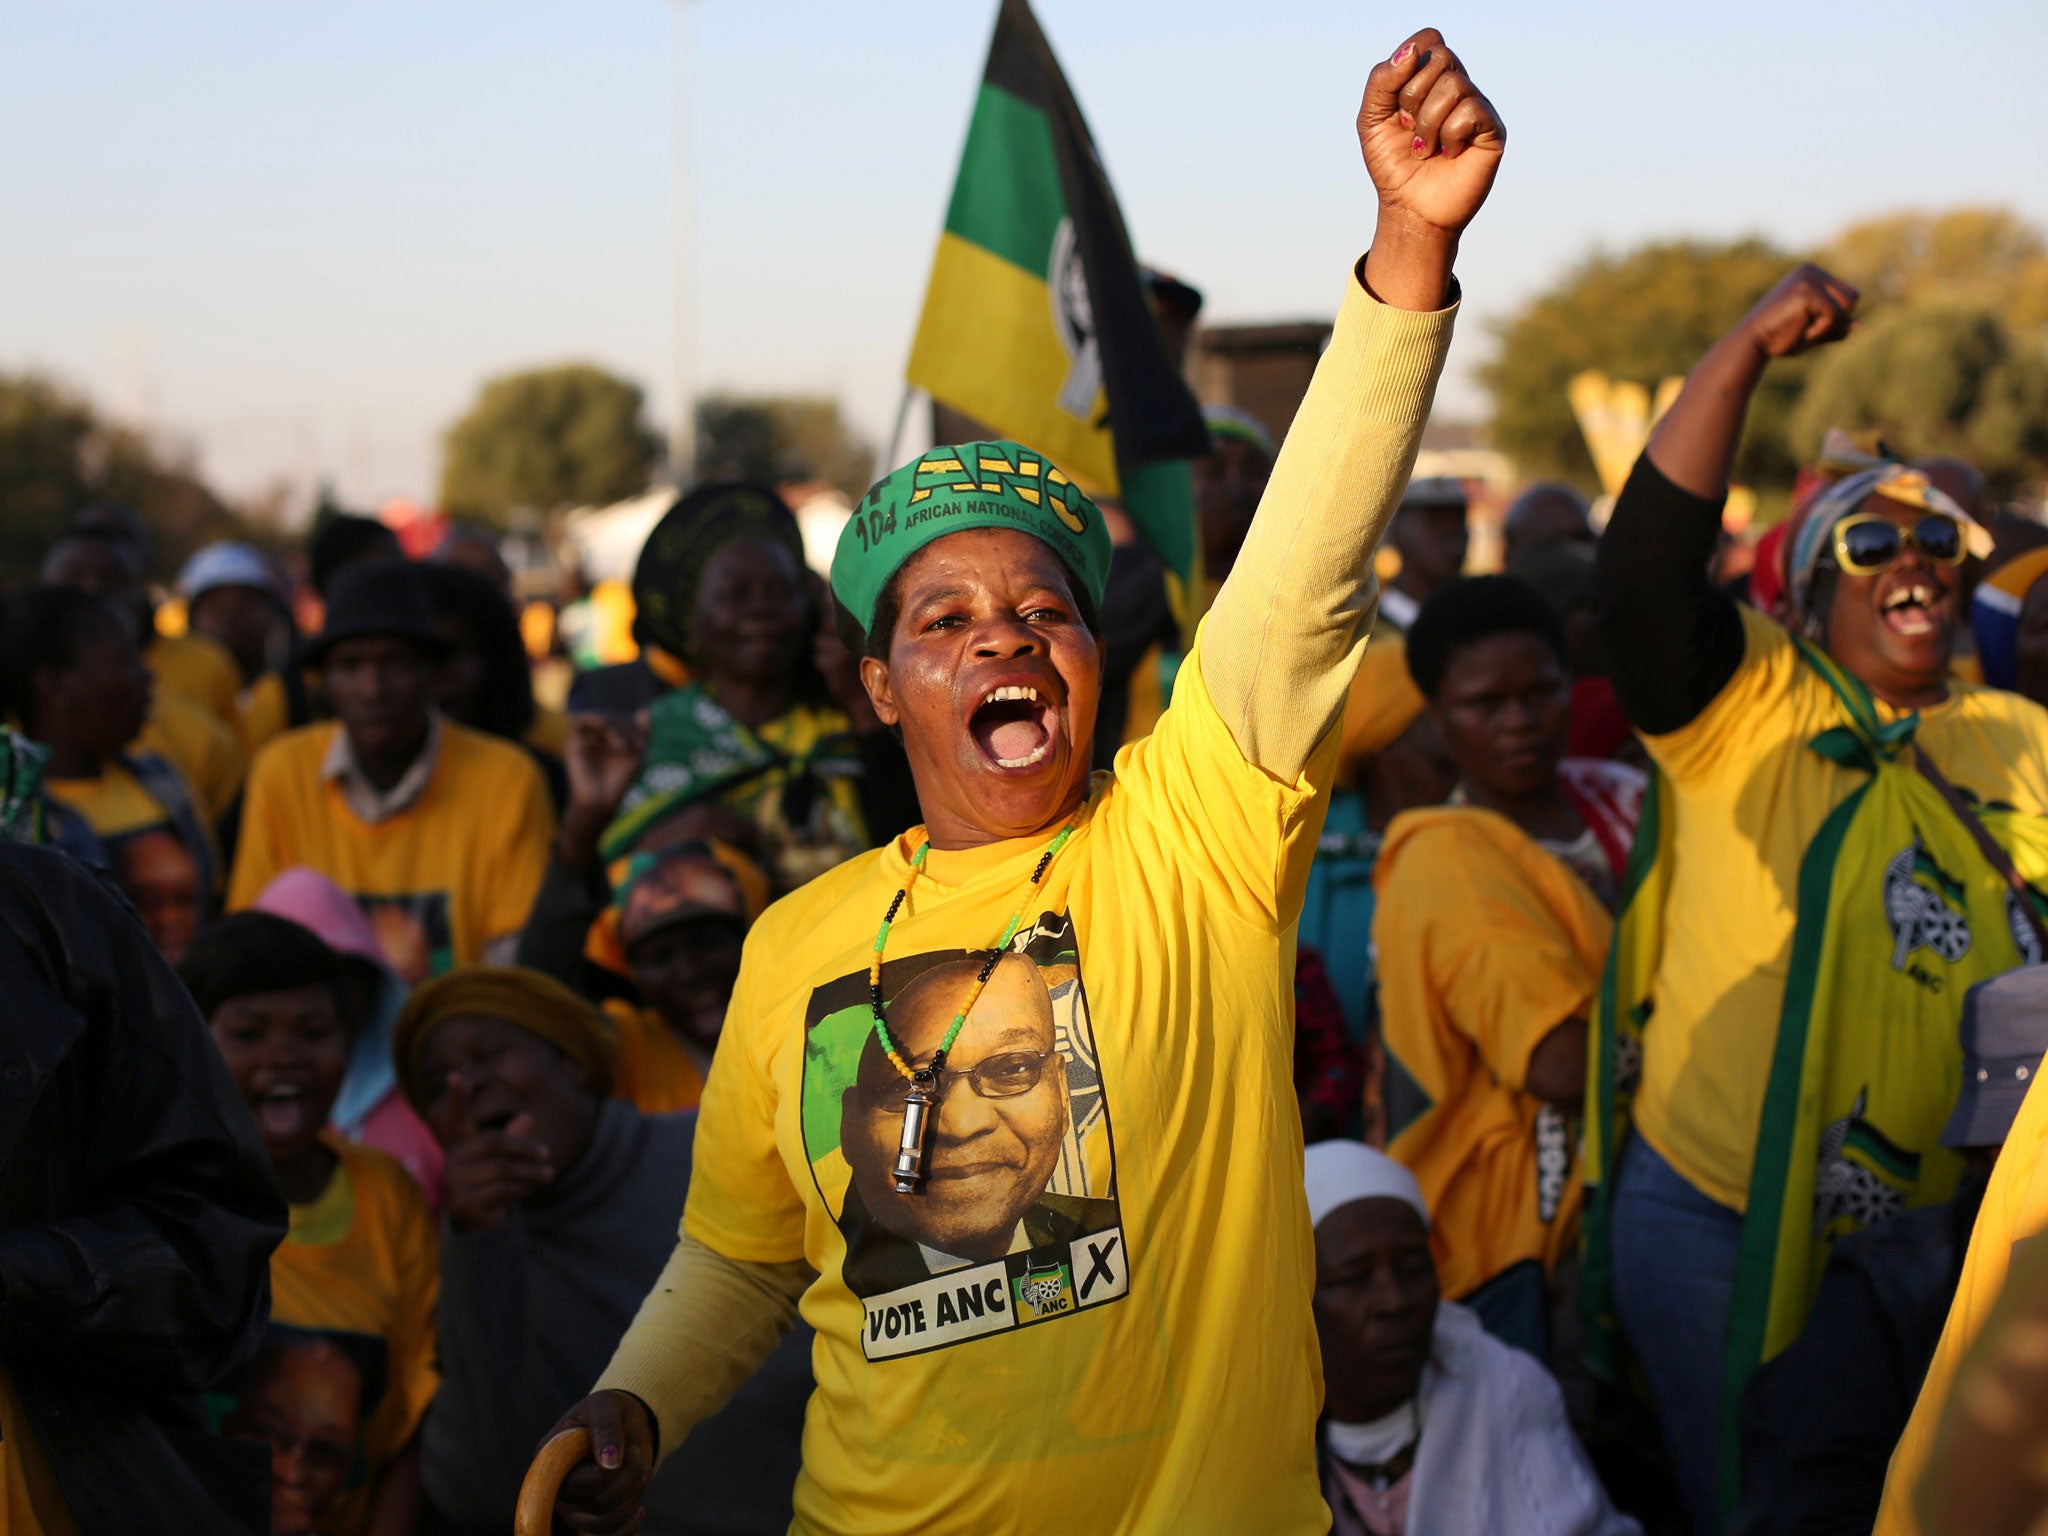 ANC supporters at a pre-election rally in Atteridgeville, a township located to the west of Pretoria